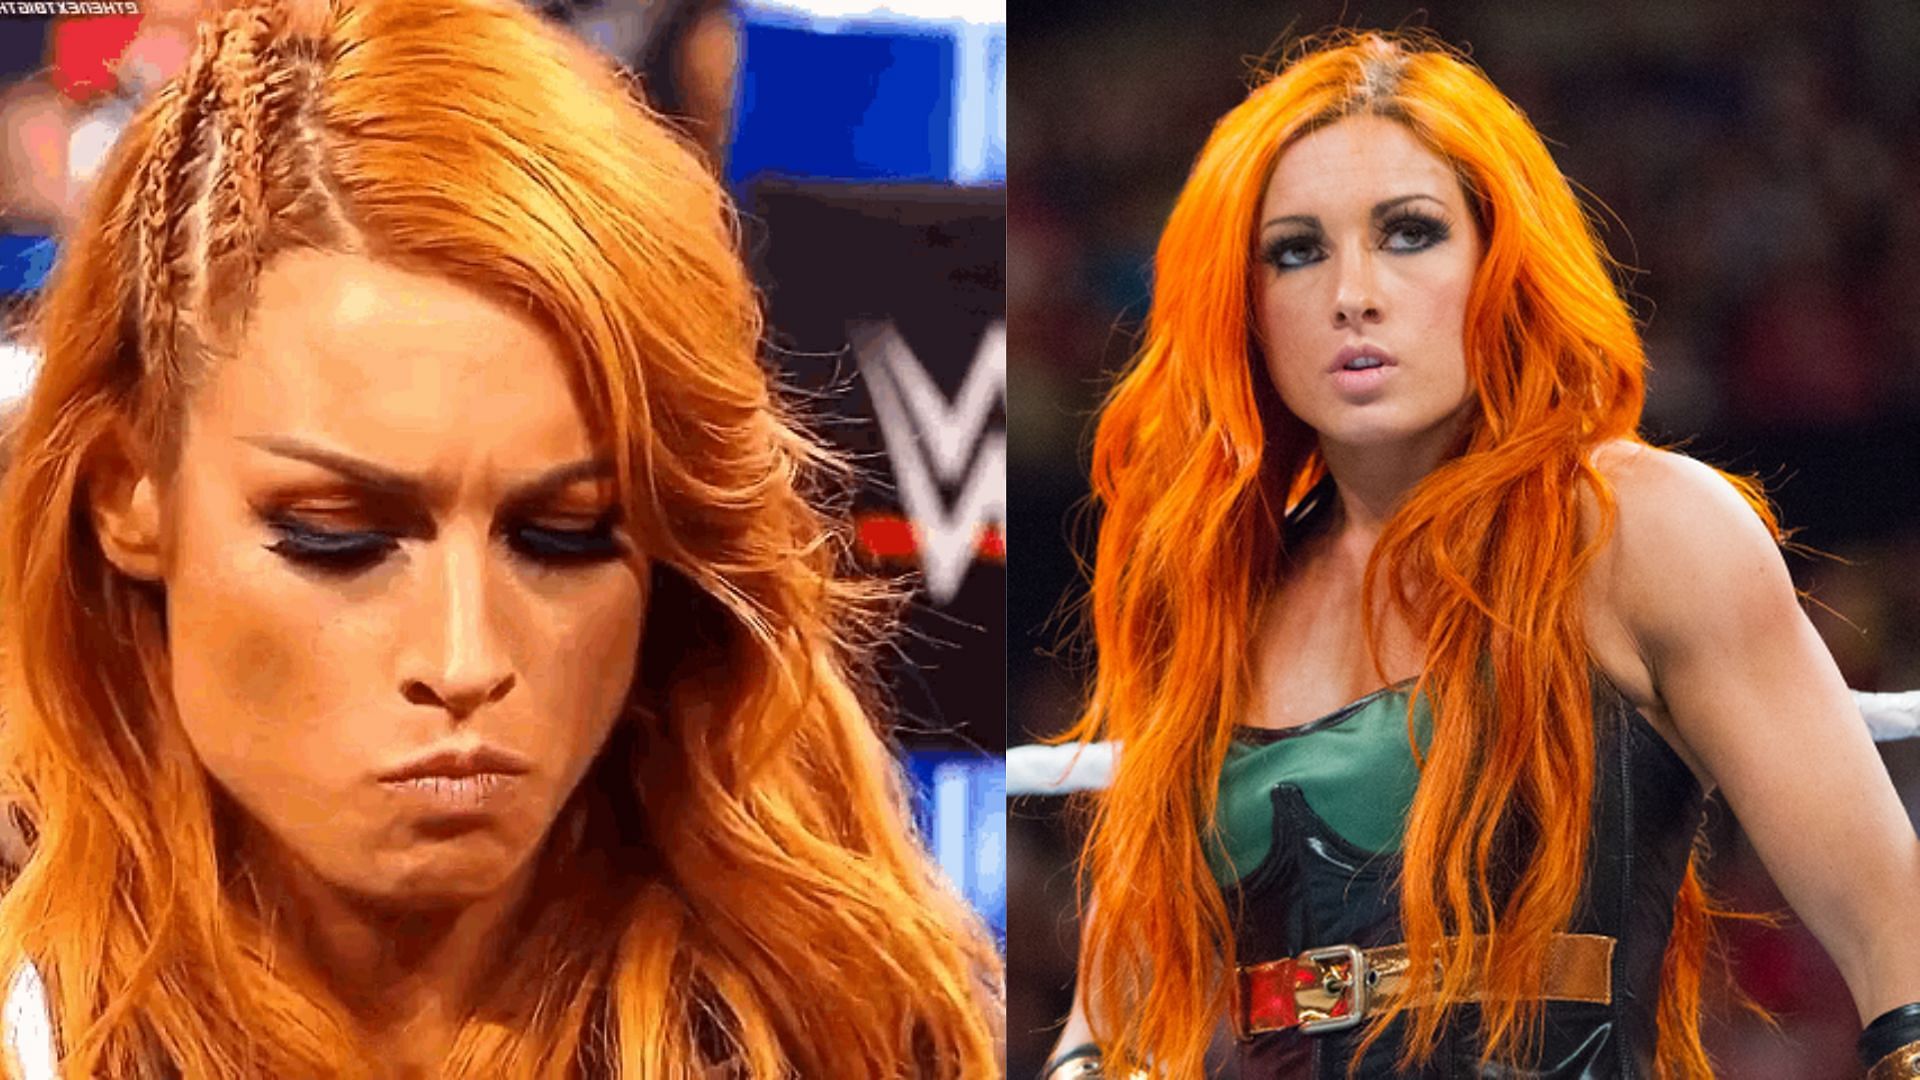 Becky Lynch will face Bayley in a steel cage match